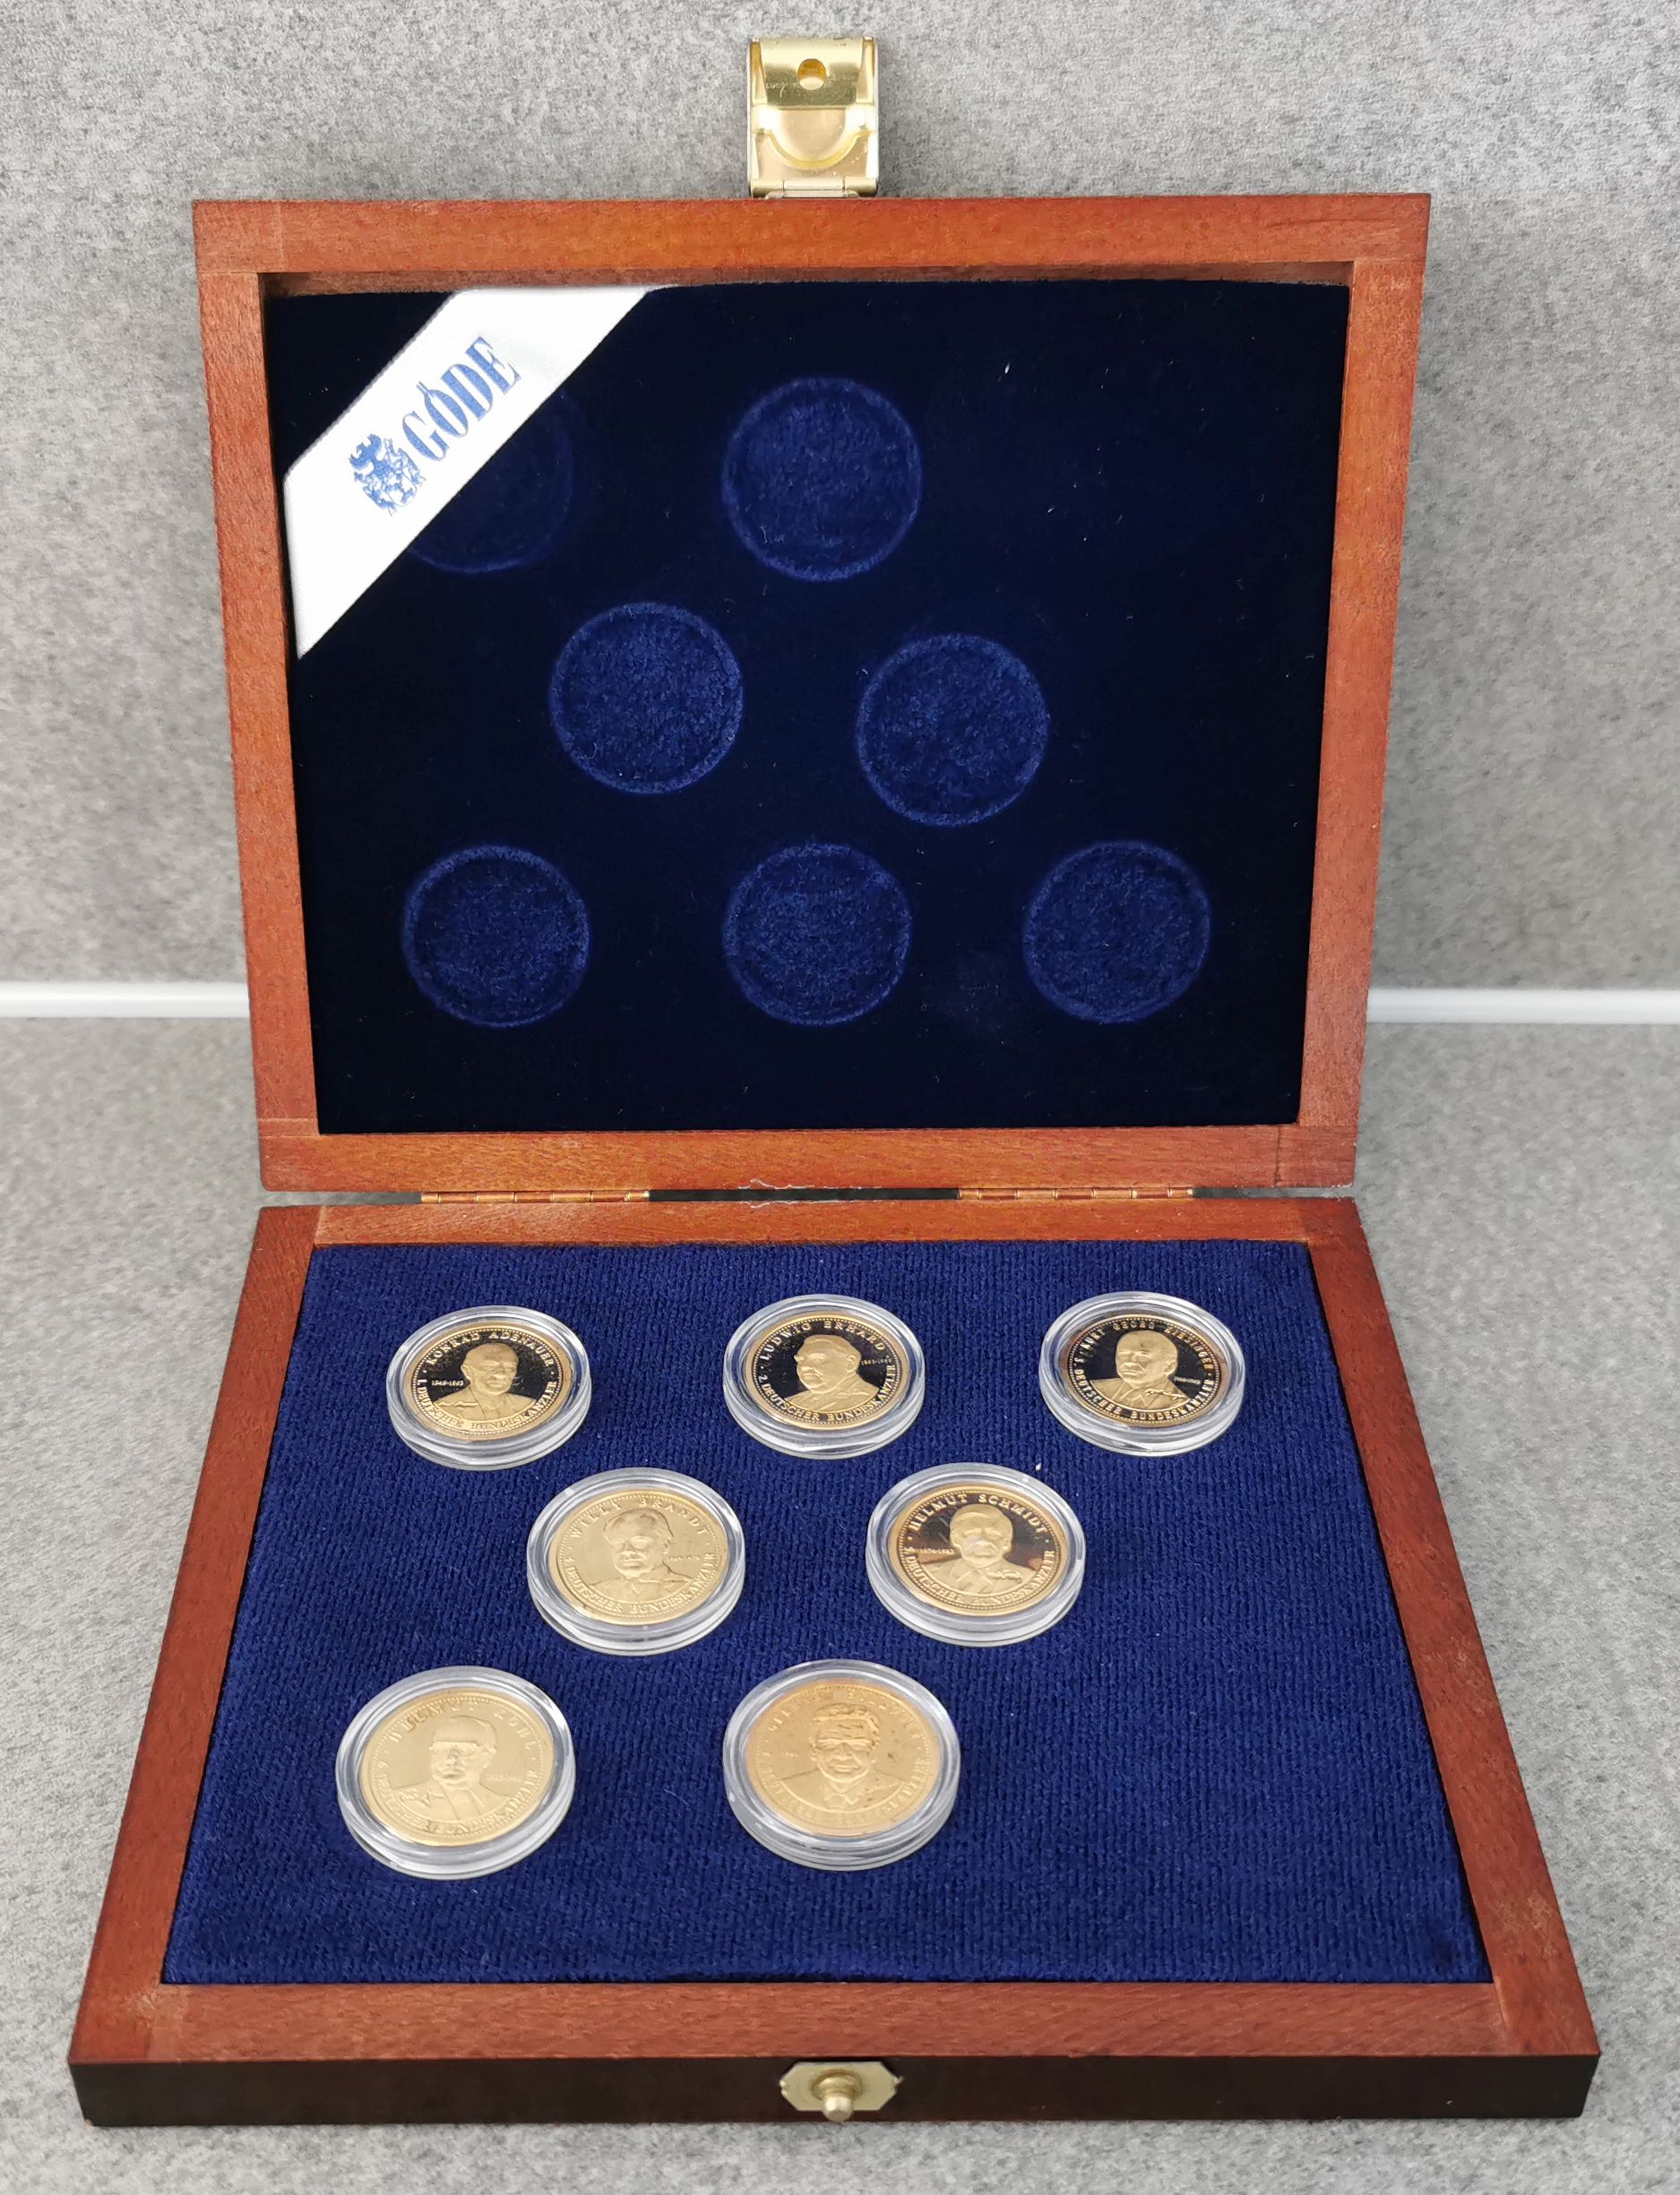 7 GOLD MEDALS OF THE FEDERAL CHANCELLORS